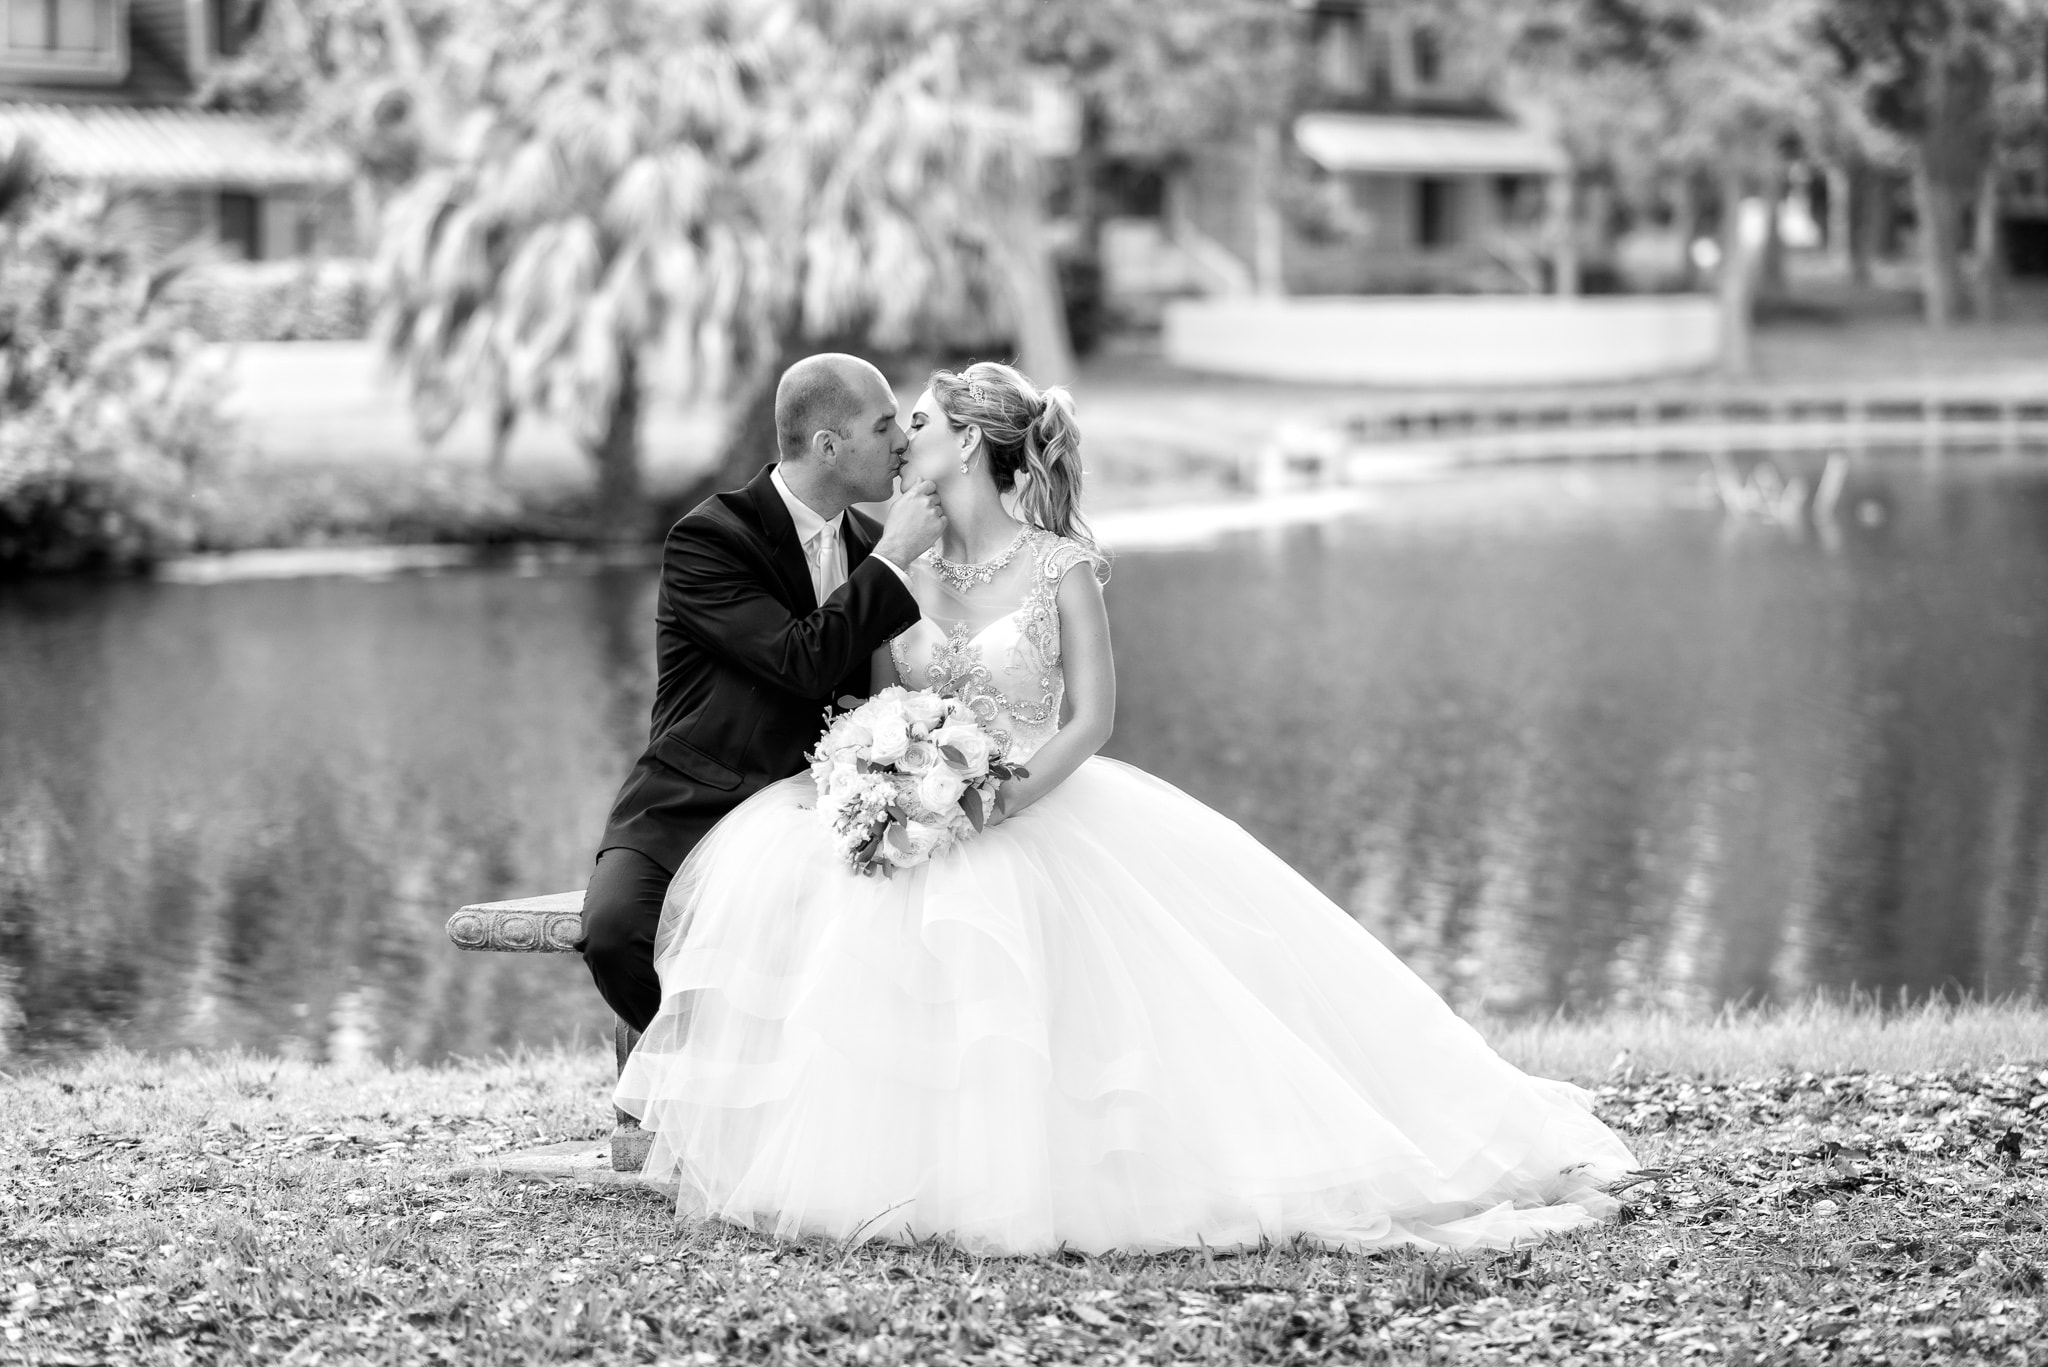 Beautiful dress and bouquet in black and white - Kingston Plantation Myrtle Beach